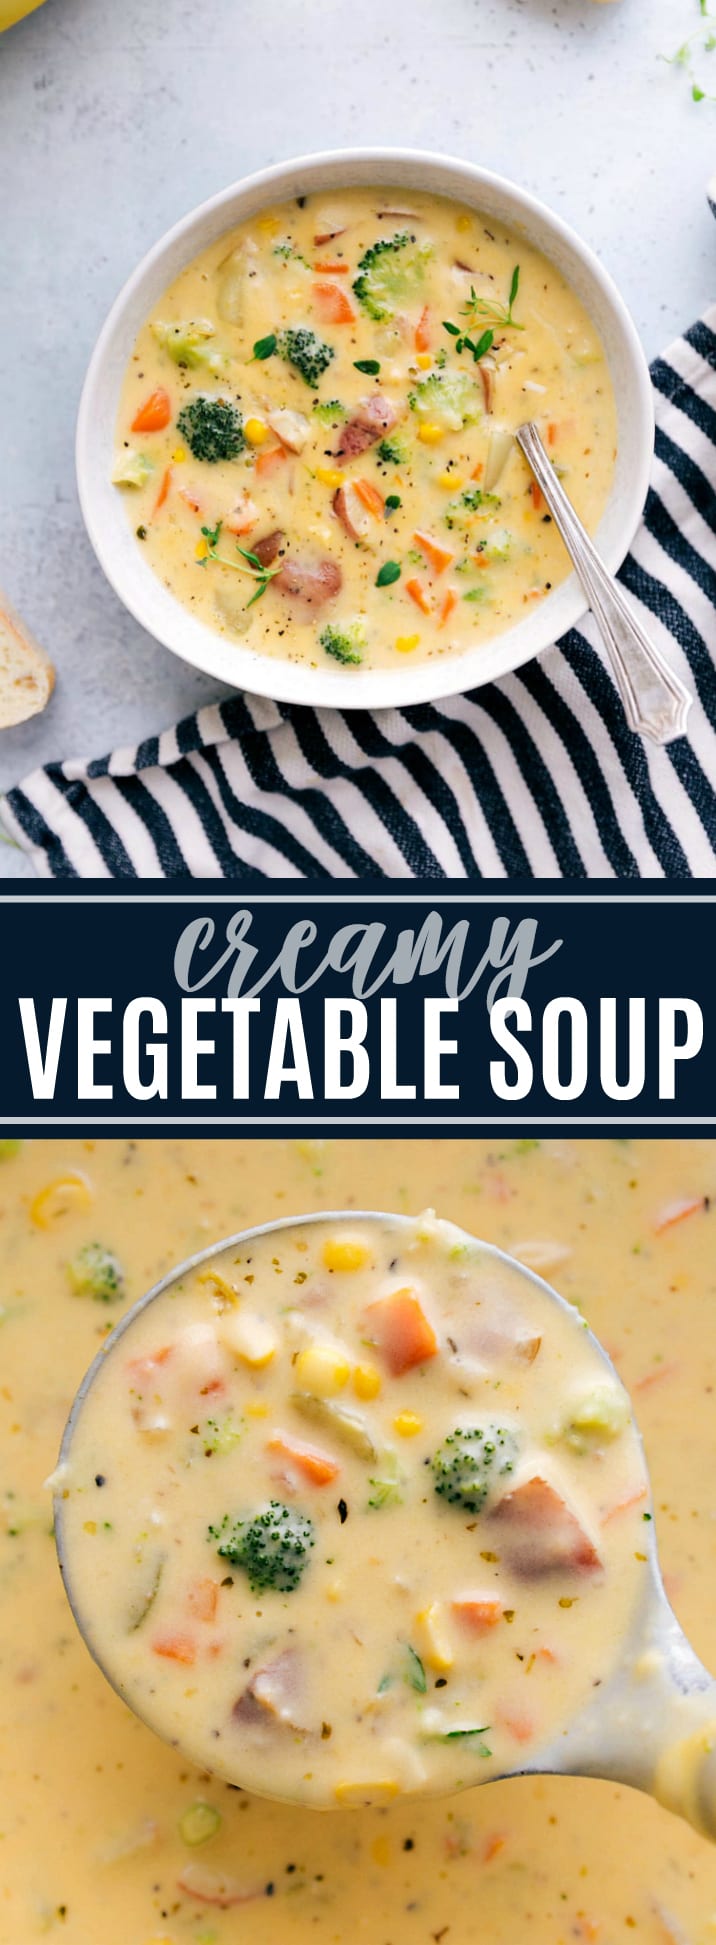 A delicious and easy-to-make creamy vegetable soup packed with veggies and healthy ingredients. via chelseasmessyapron.com #stovetop #easy #creamy #vegetable #soup #quick #simple #cheese #broccoli #corn #recipe #kidfriendly #dinner #meal